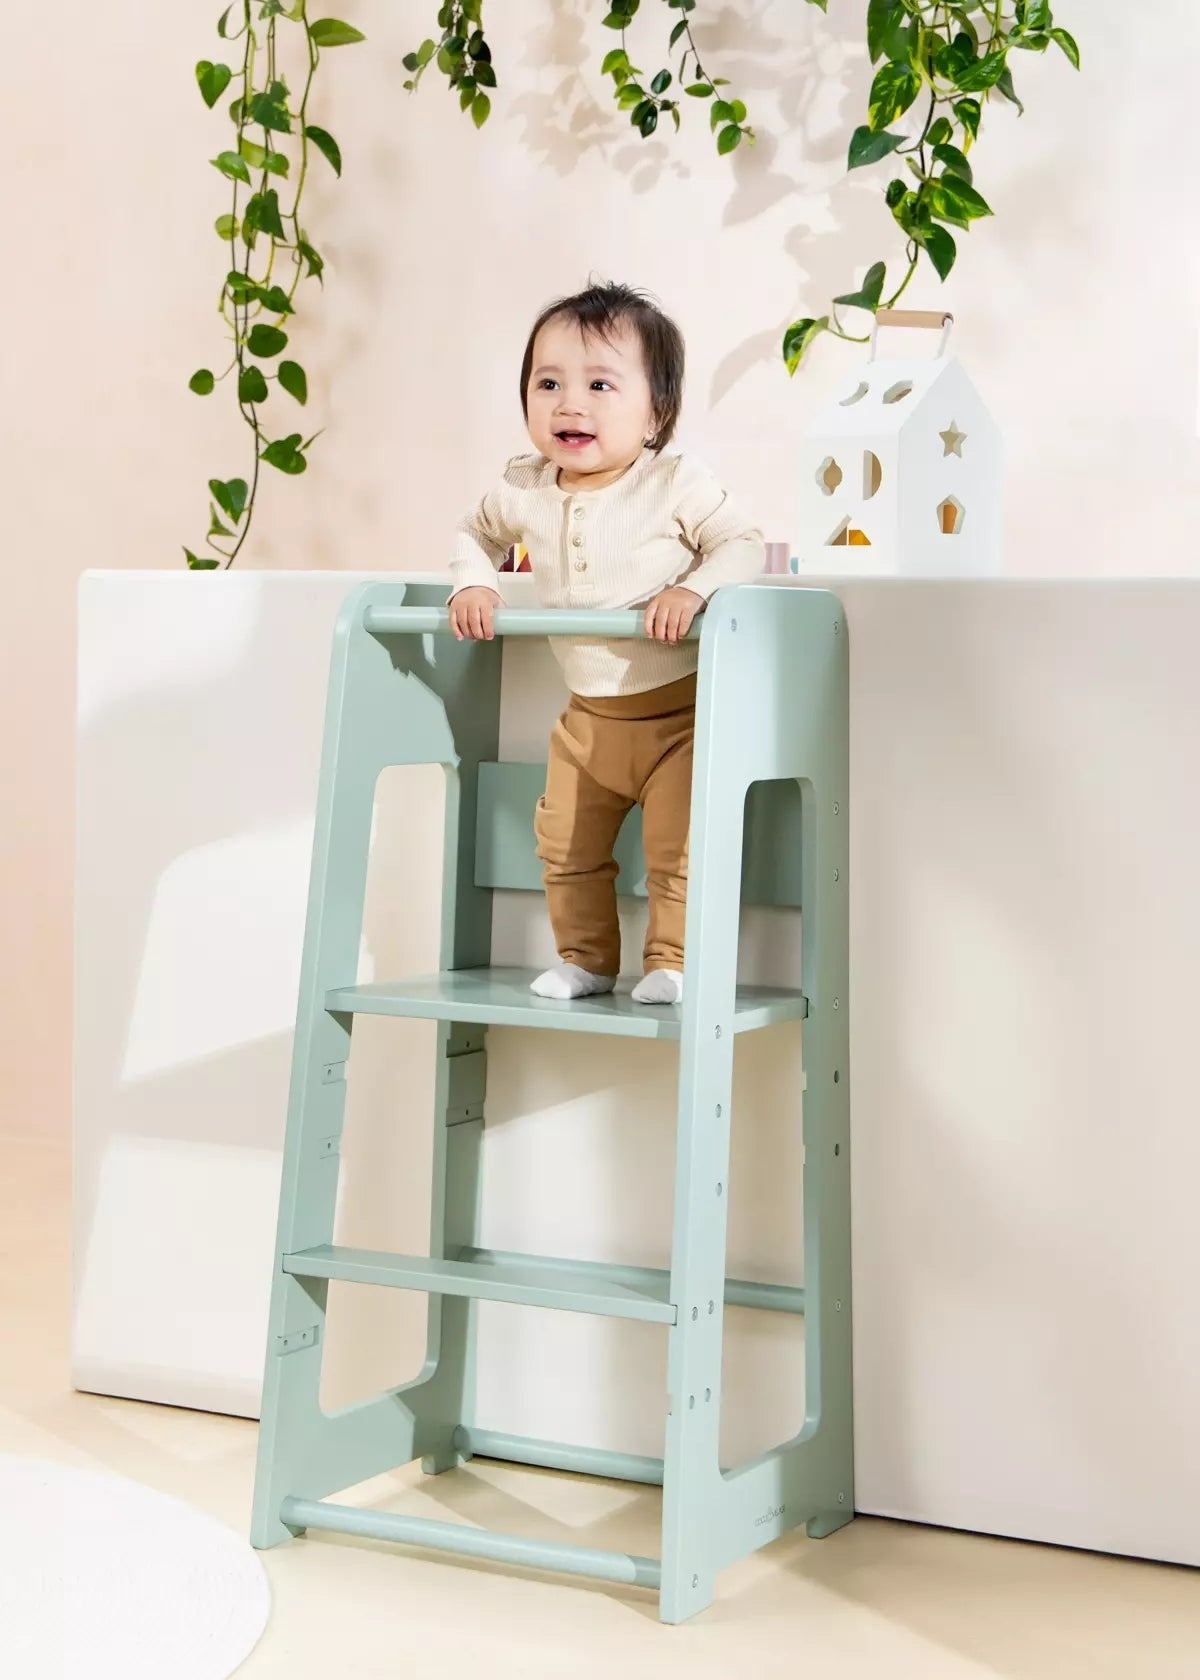 Toddler stands on a learning tower, reaching for a shelf, in a home environment